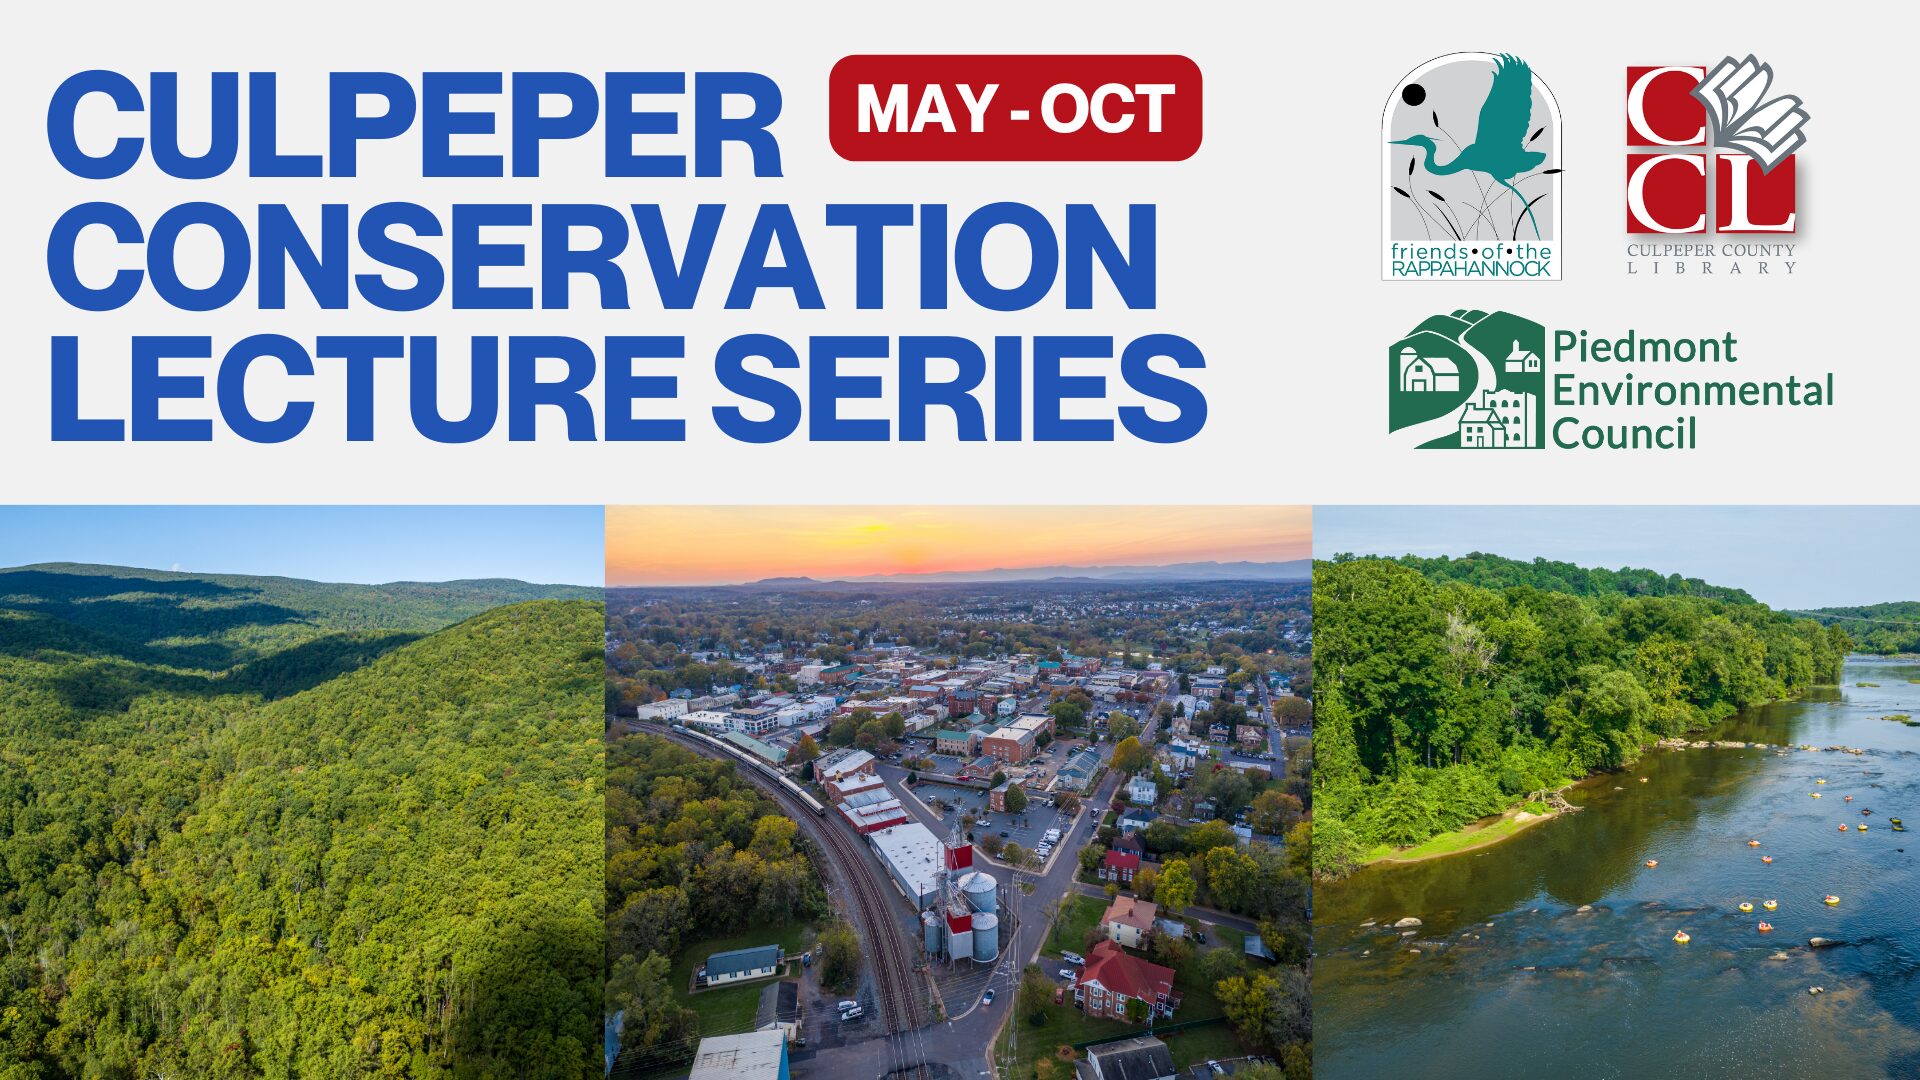 Culpeper Conservation Lecture Series